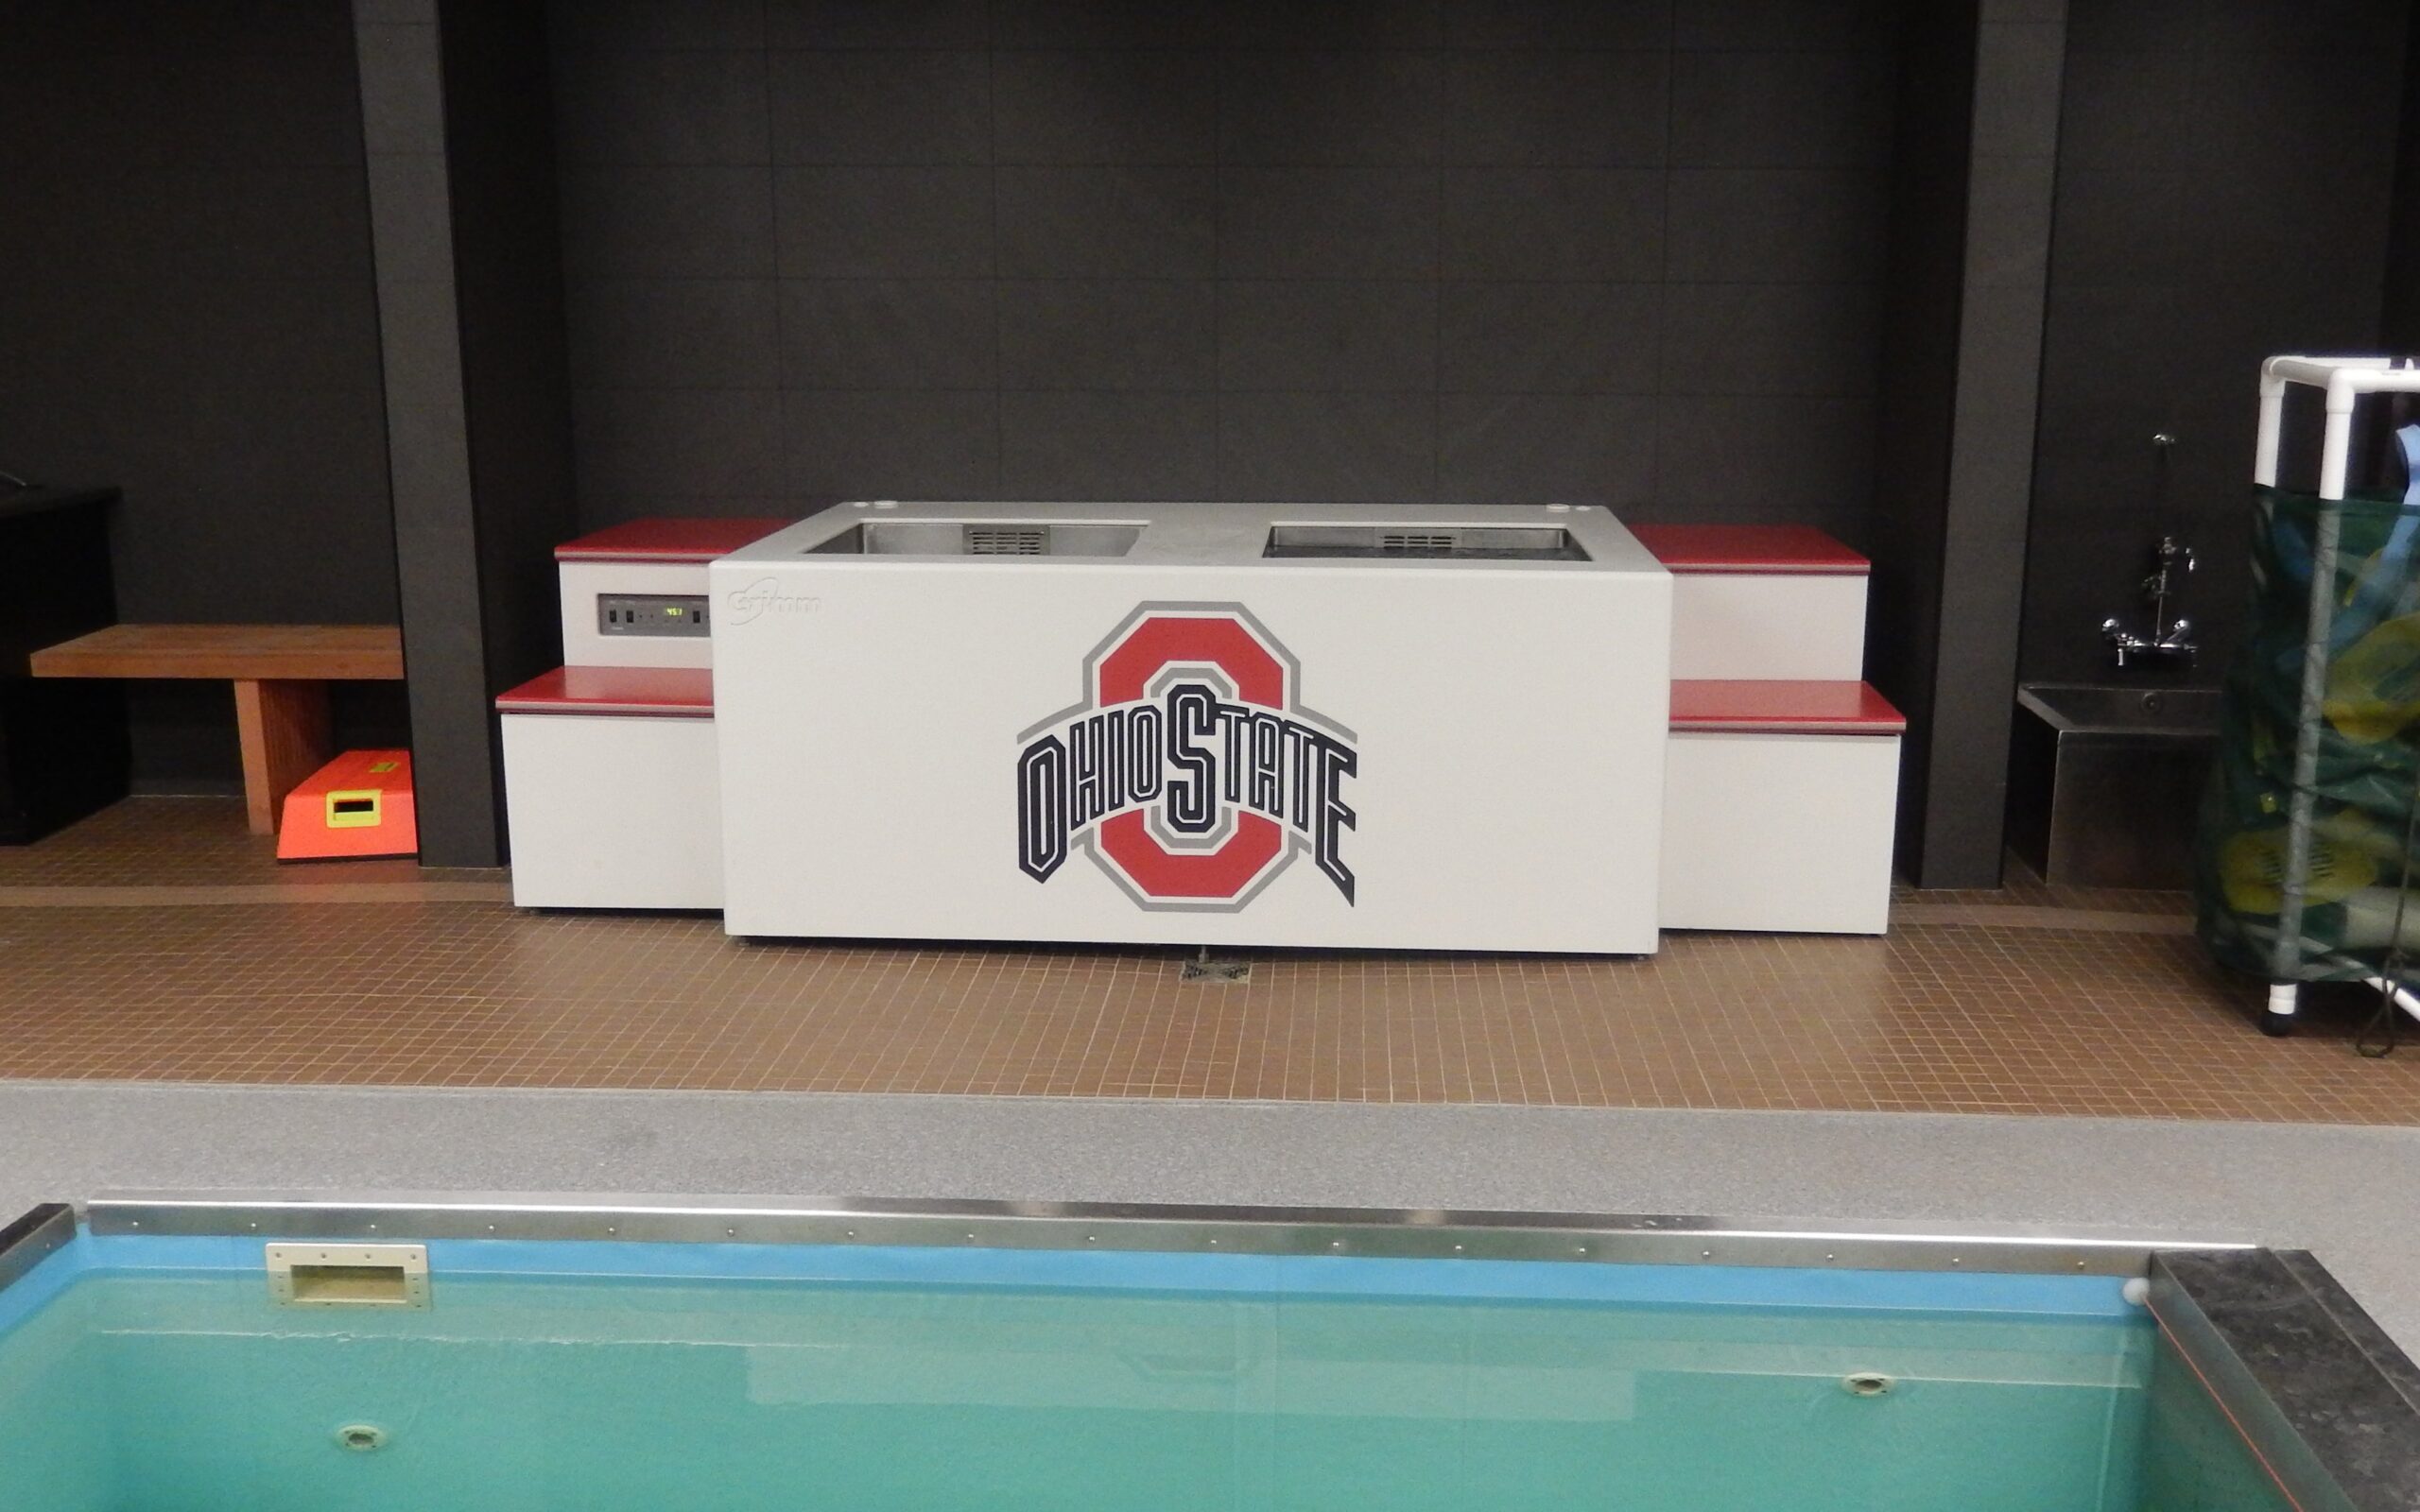 Ohio state university cryotherm grimm scientific hydrotherapy